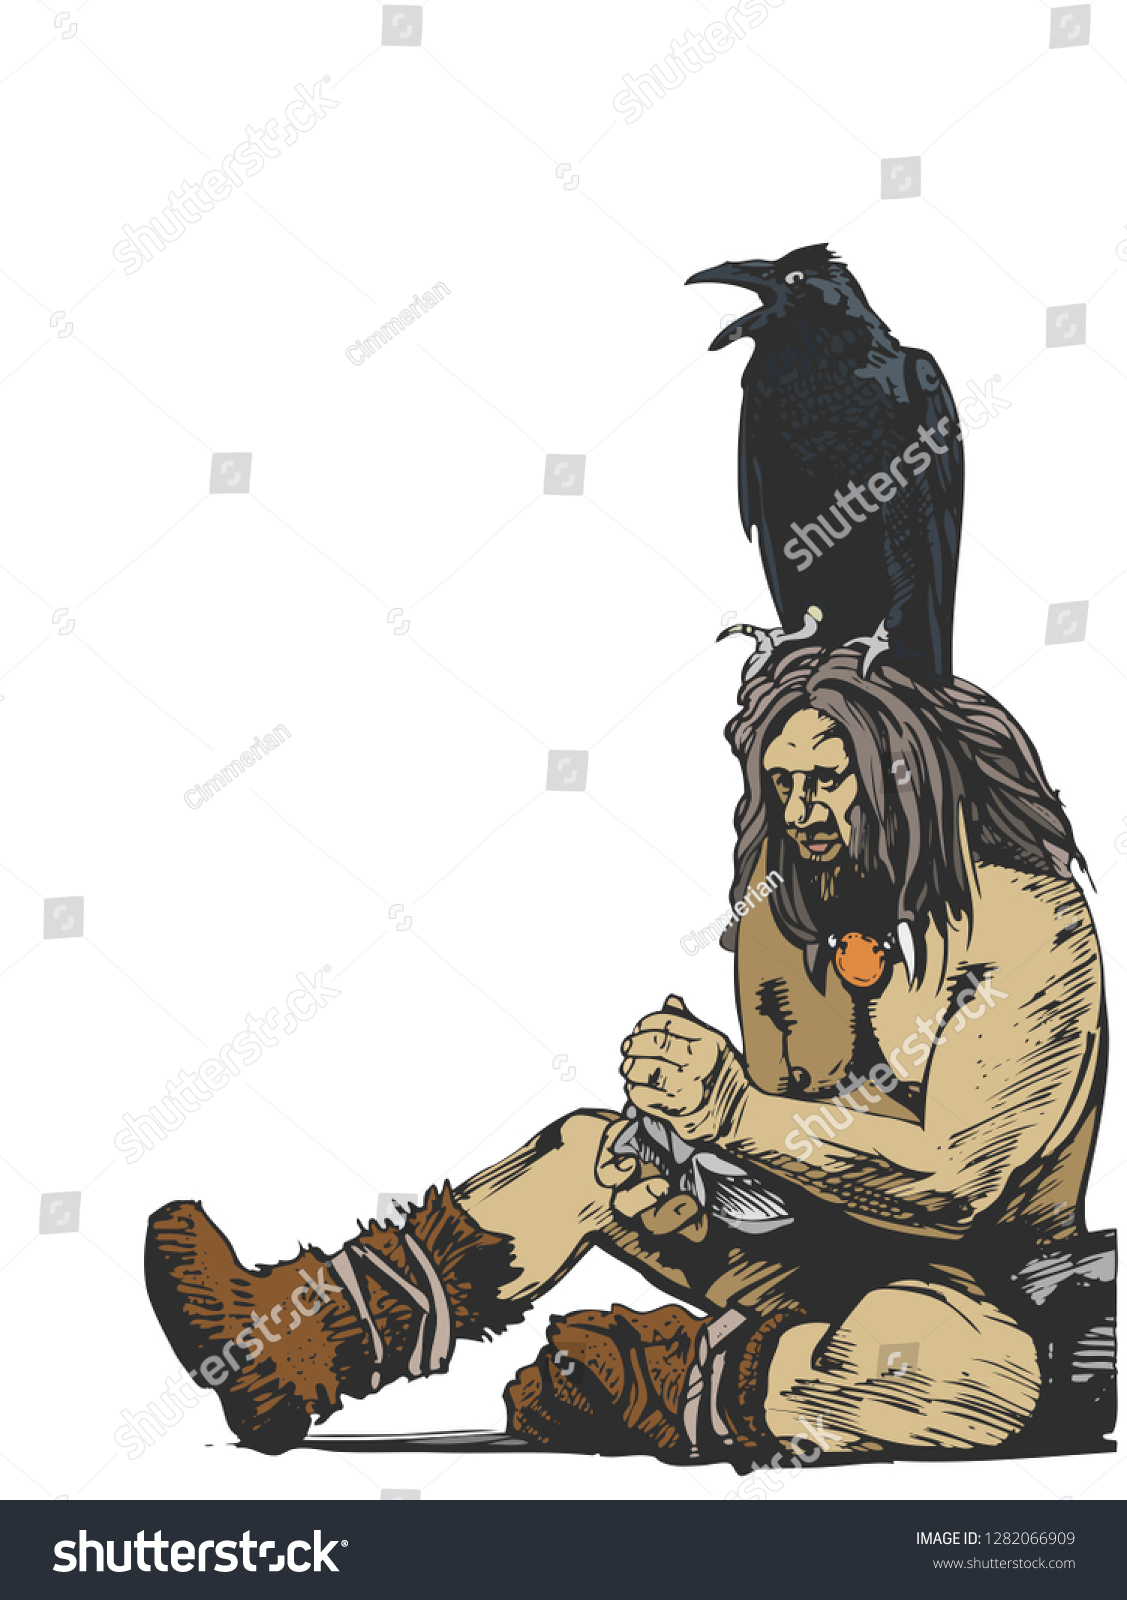 SVG of Cro-Magnon man with crow. Ancient man makes fire. In the same portfolio there is a black and white version. svg